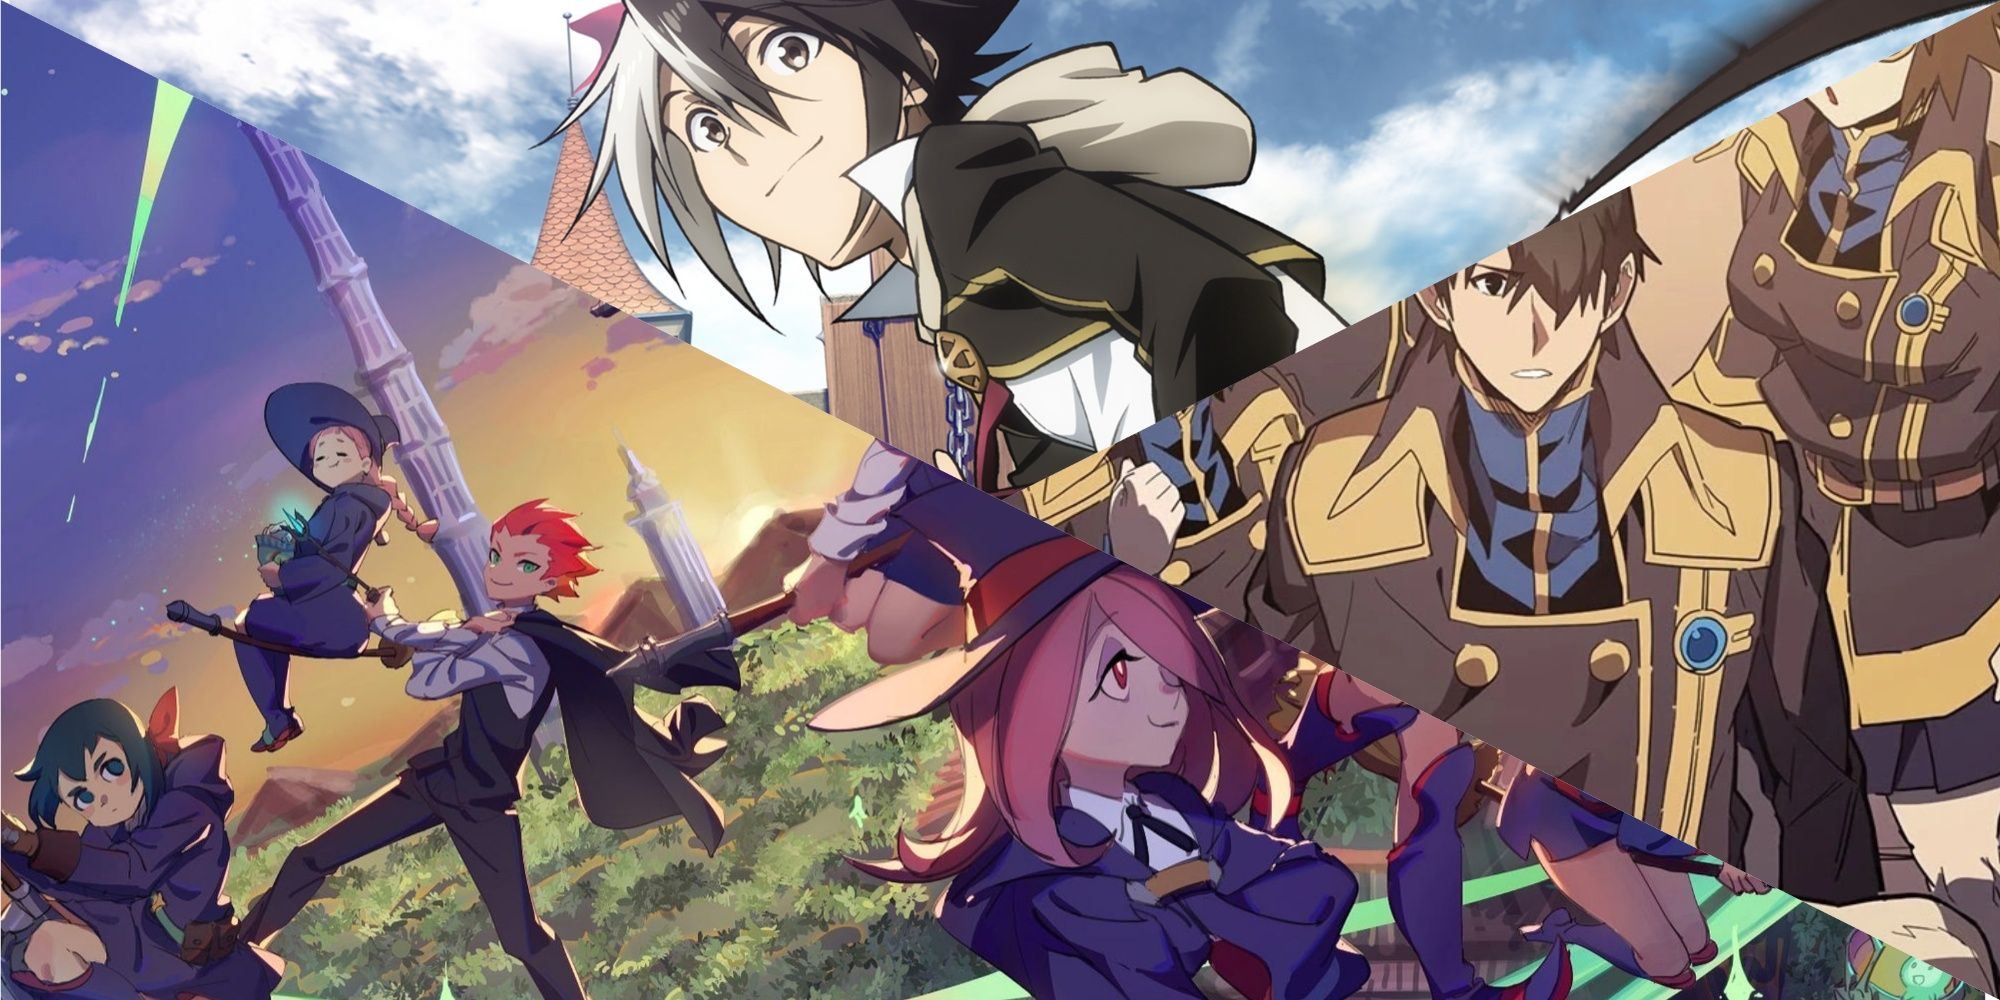 Is there any anime with love, action, and fantasy magic school with  multiple seasons? - Quora